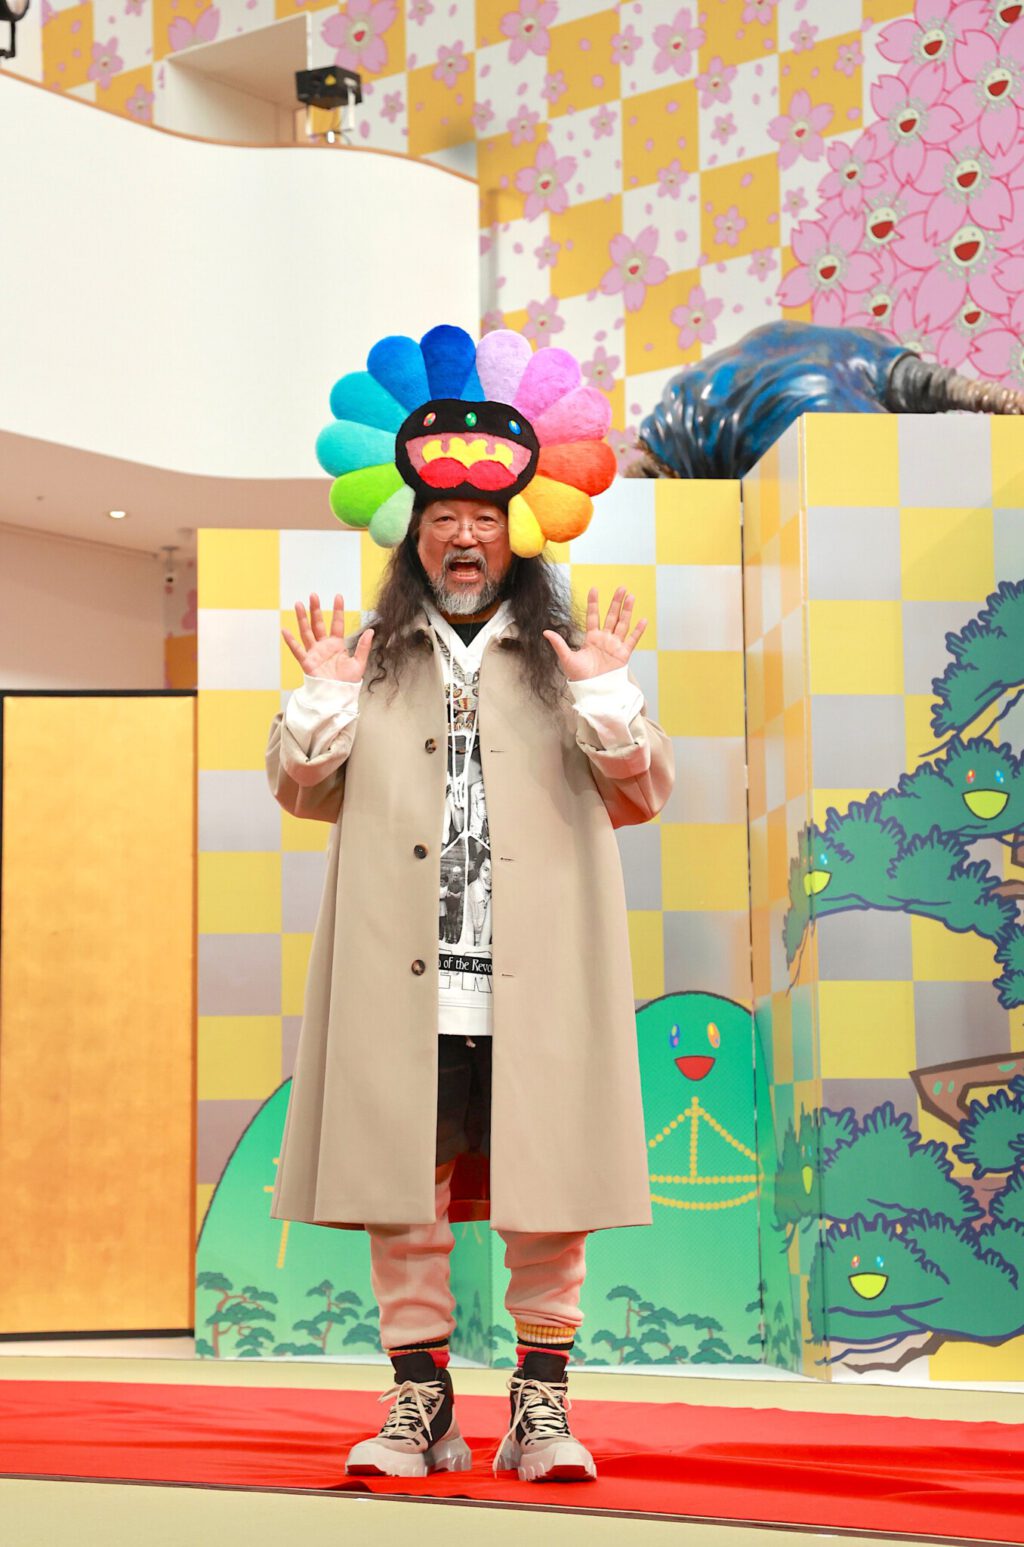 MURAKAMI Takashi on the preview day @ Kyoto City KYOCERA Museum of Art